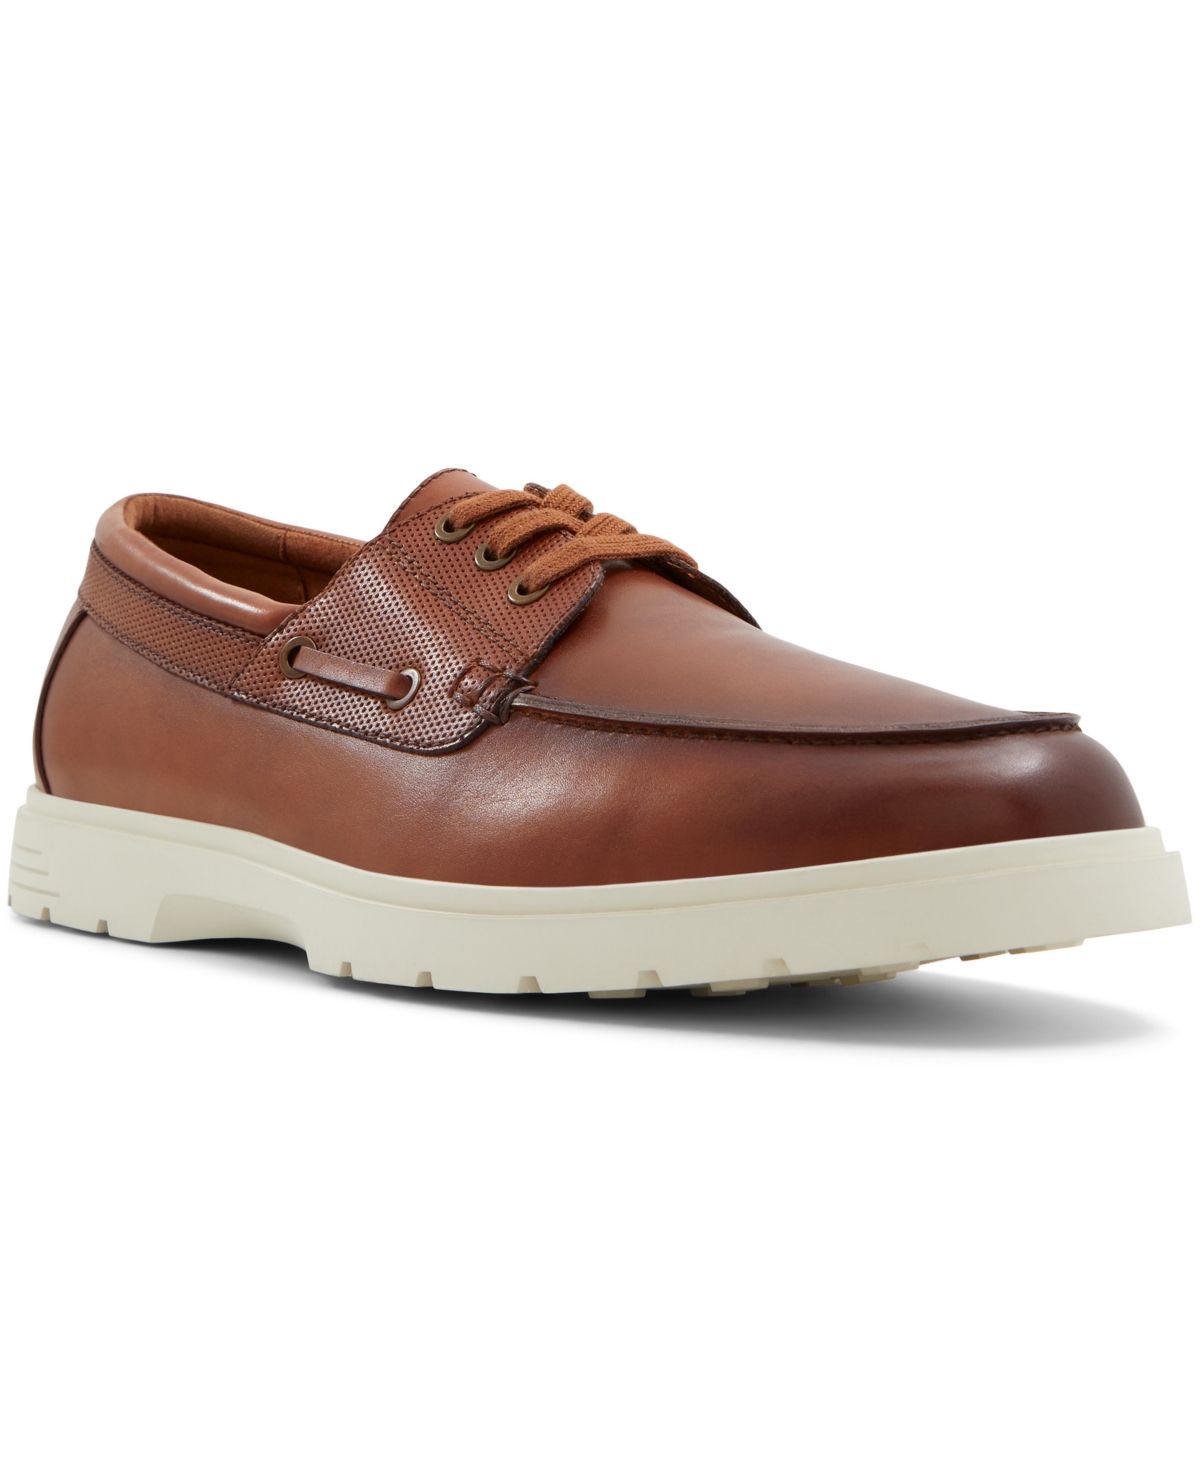 Men's Kays Casual Lace Up Shoes - Light Brown